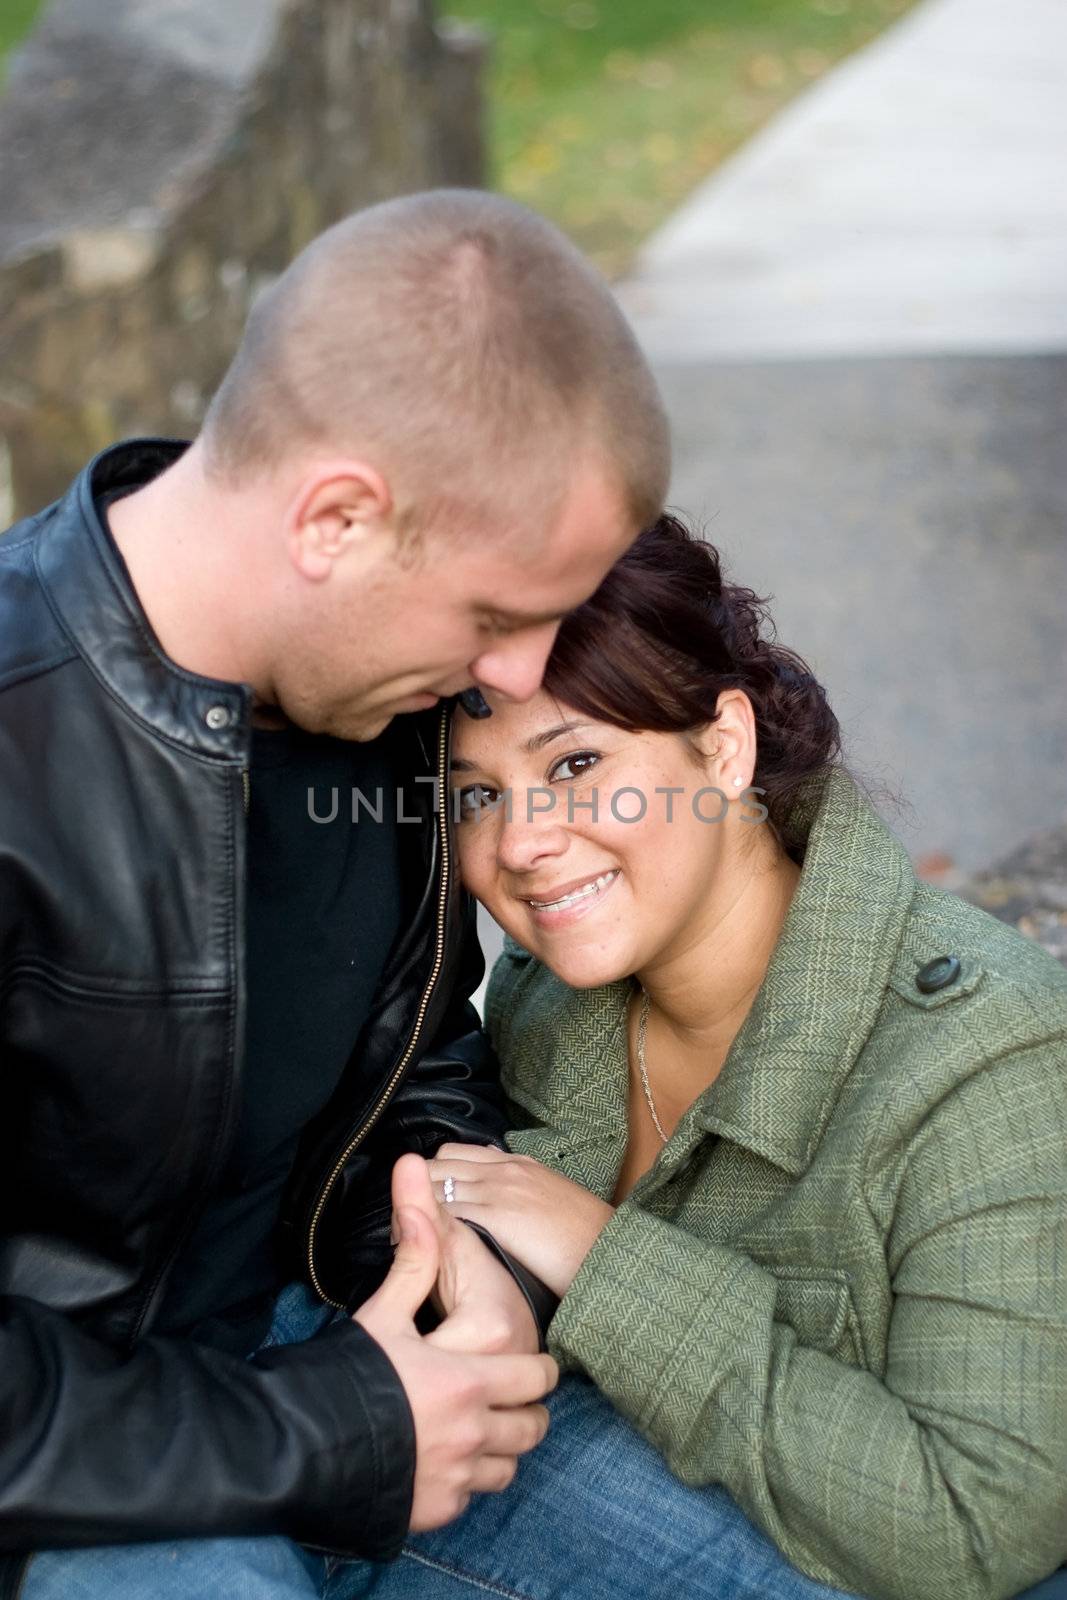 A happy interracial couple cuddling together outdoors. Shallow depth of field.